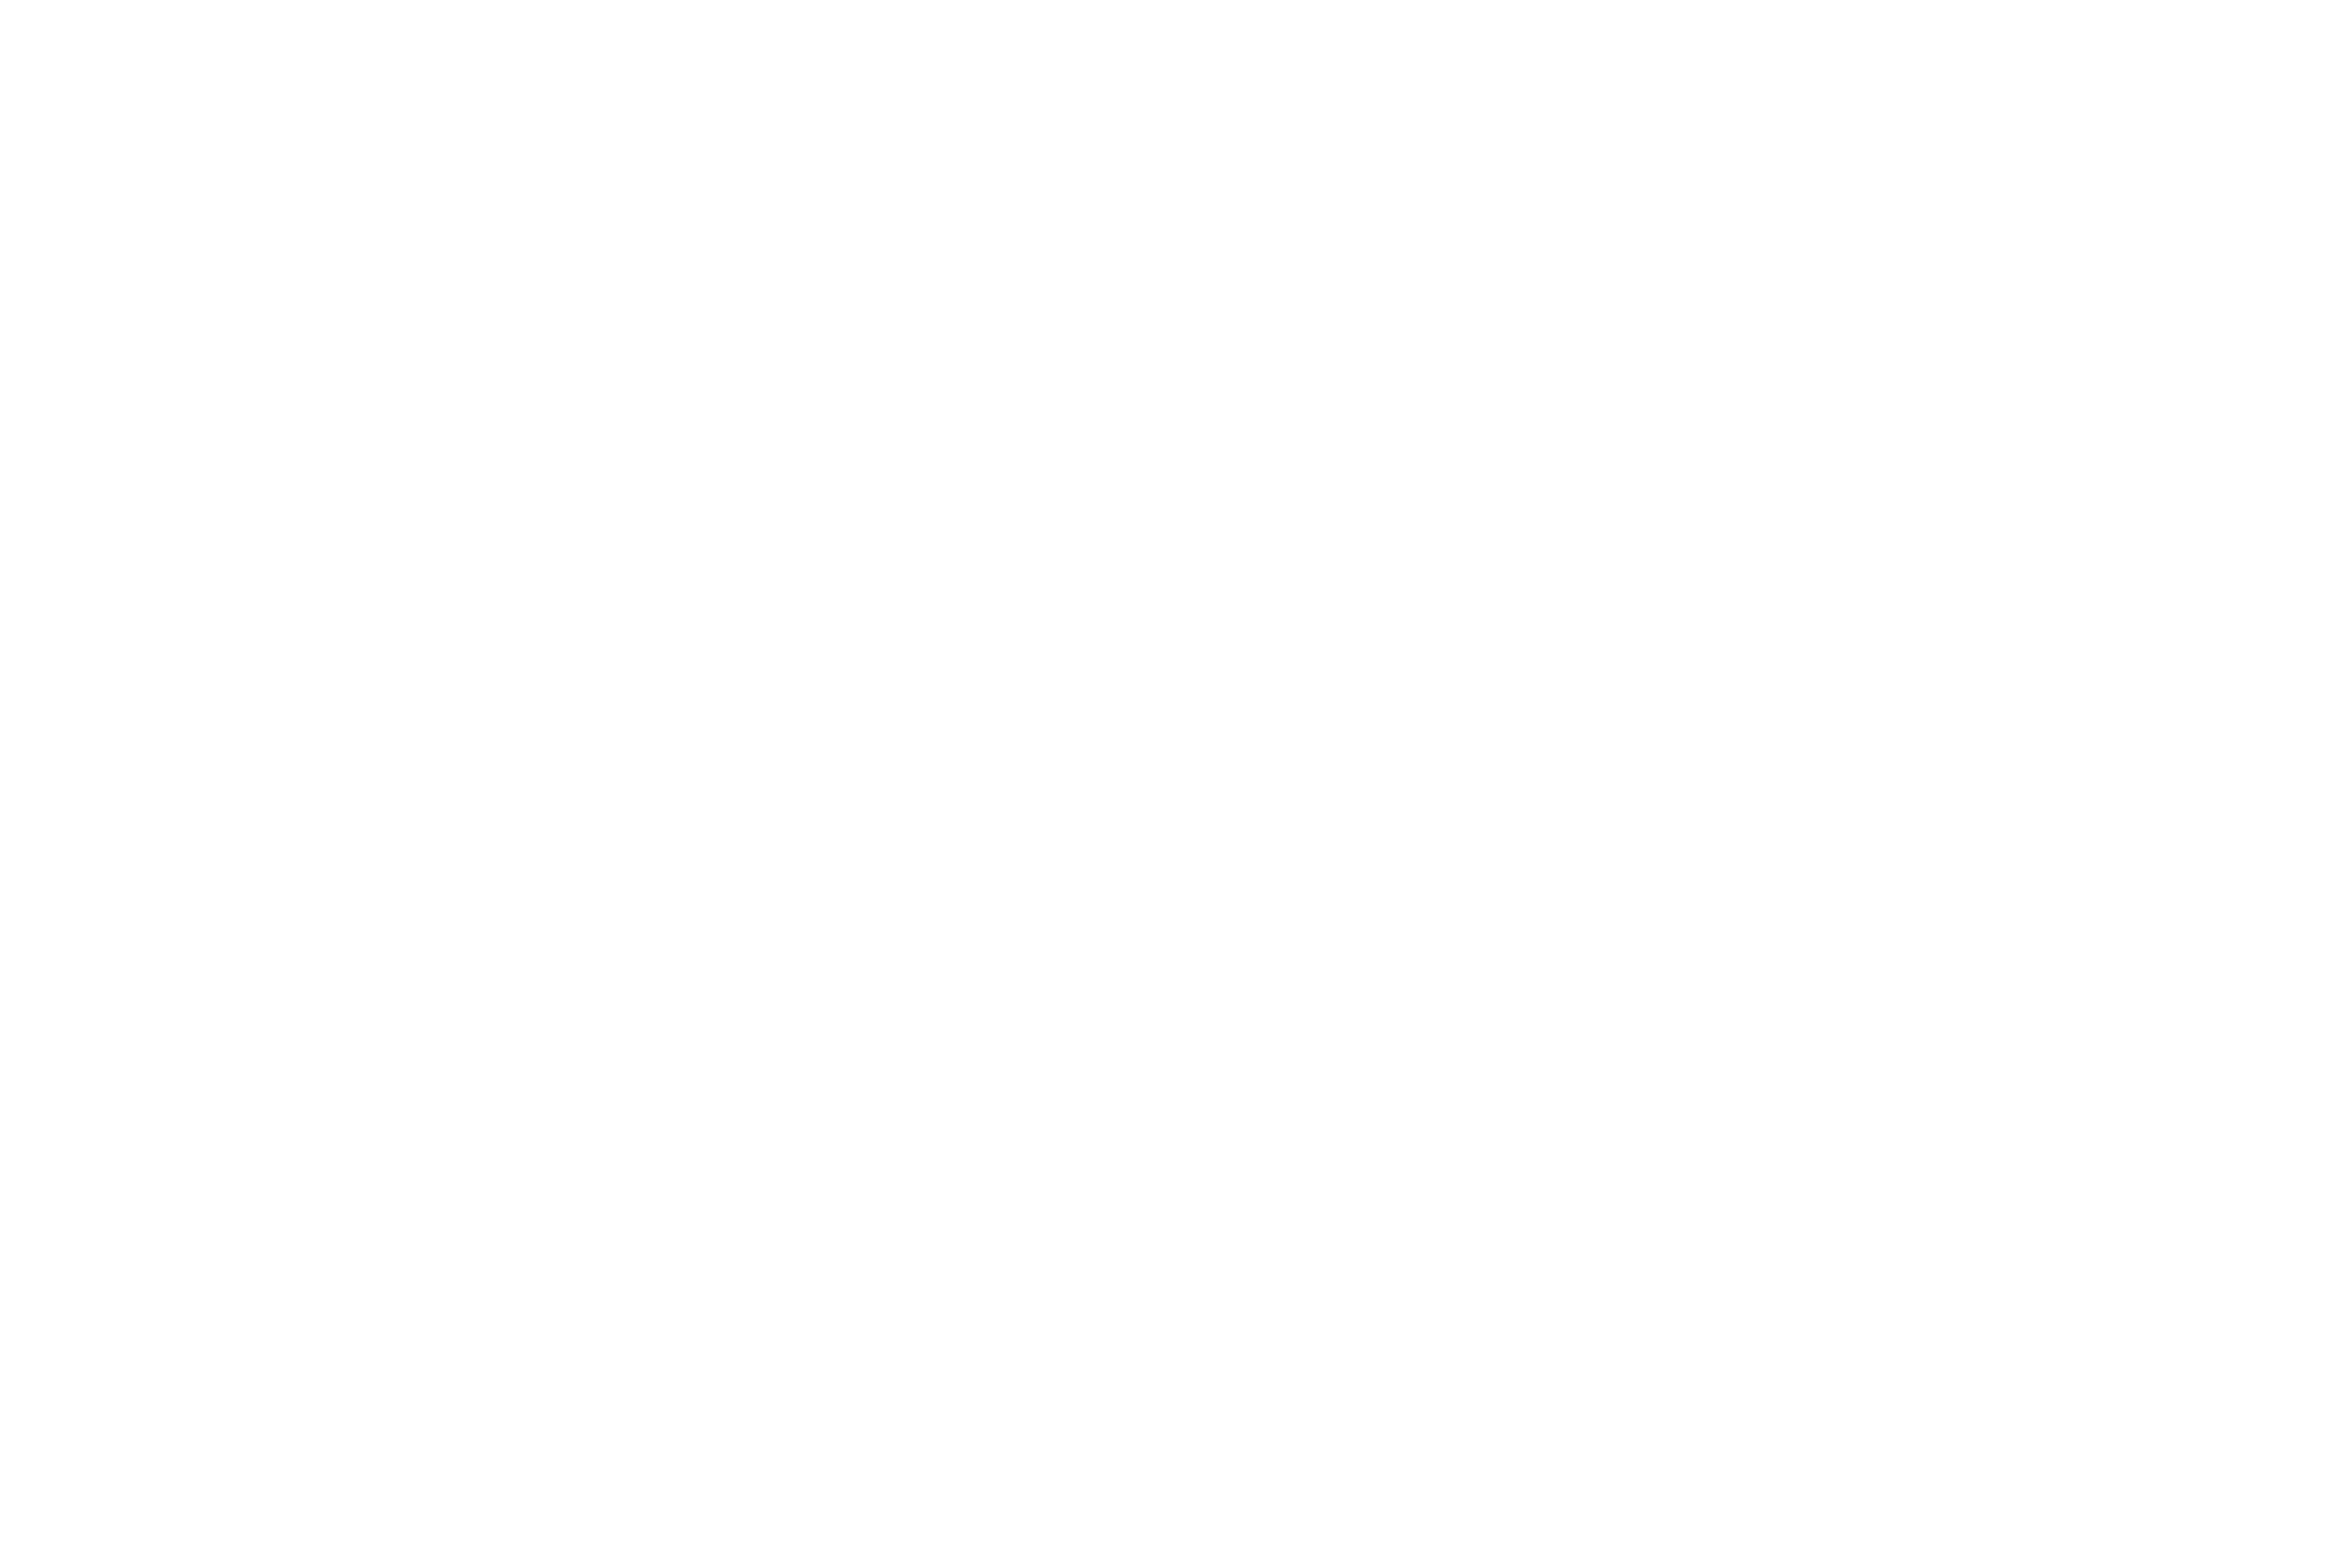 BOOTS AND HEARTS